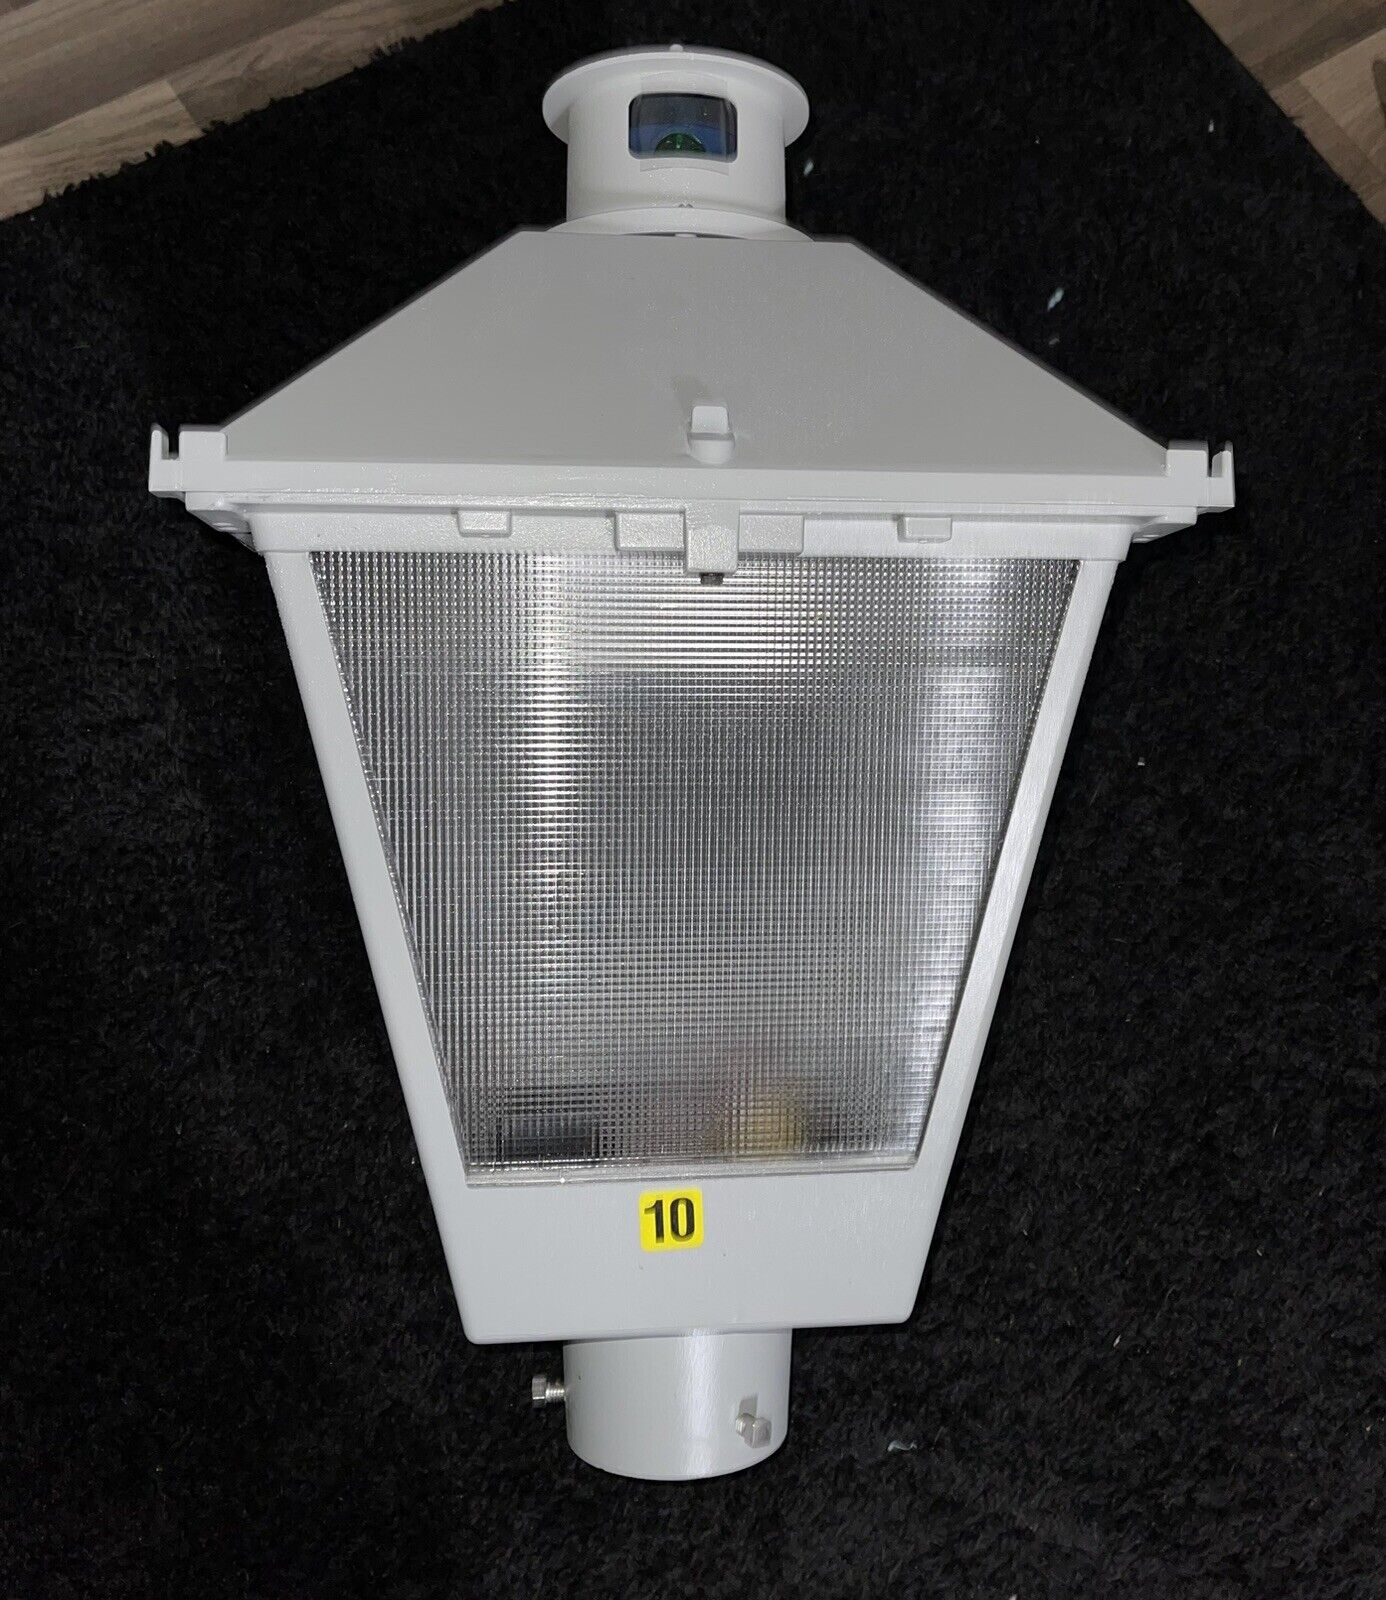 COOPER LIGHTING STREETWORKS HPS 100 Watt POSTLIGHT COMES WITH BULB AND PHOTOCELL